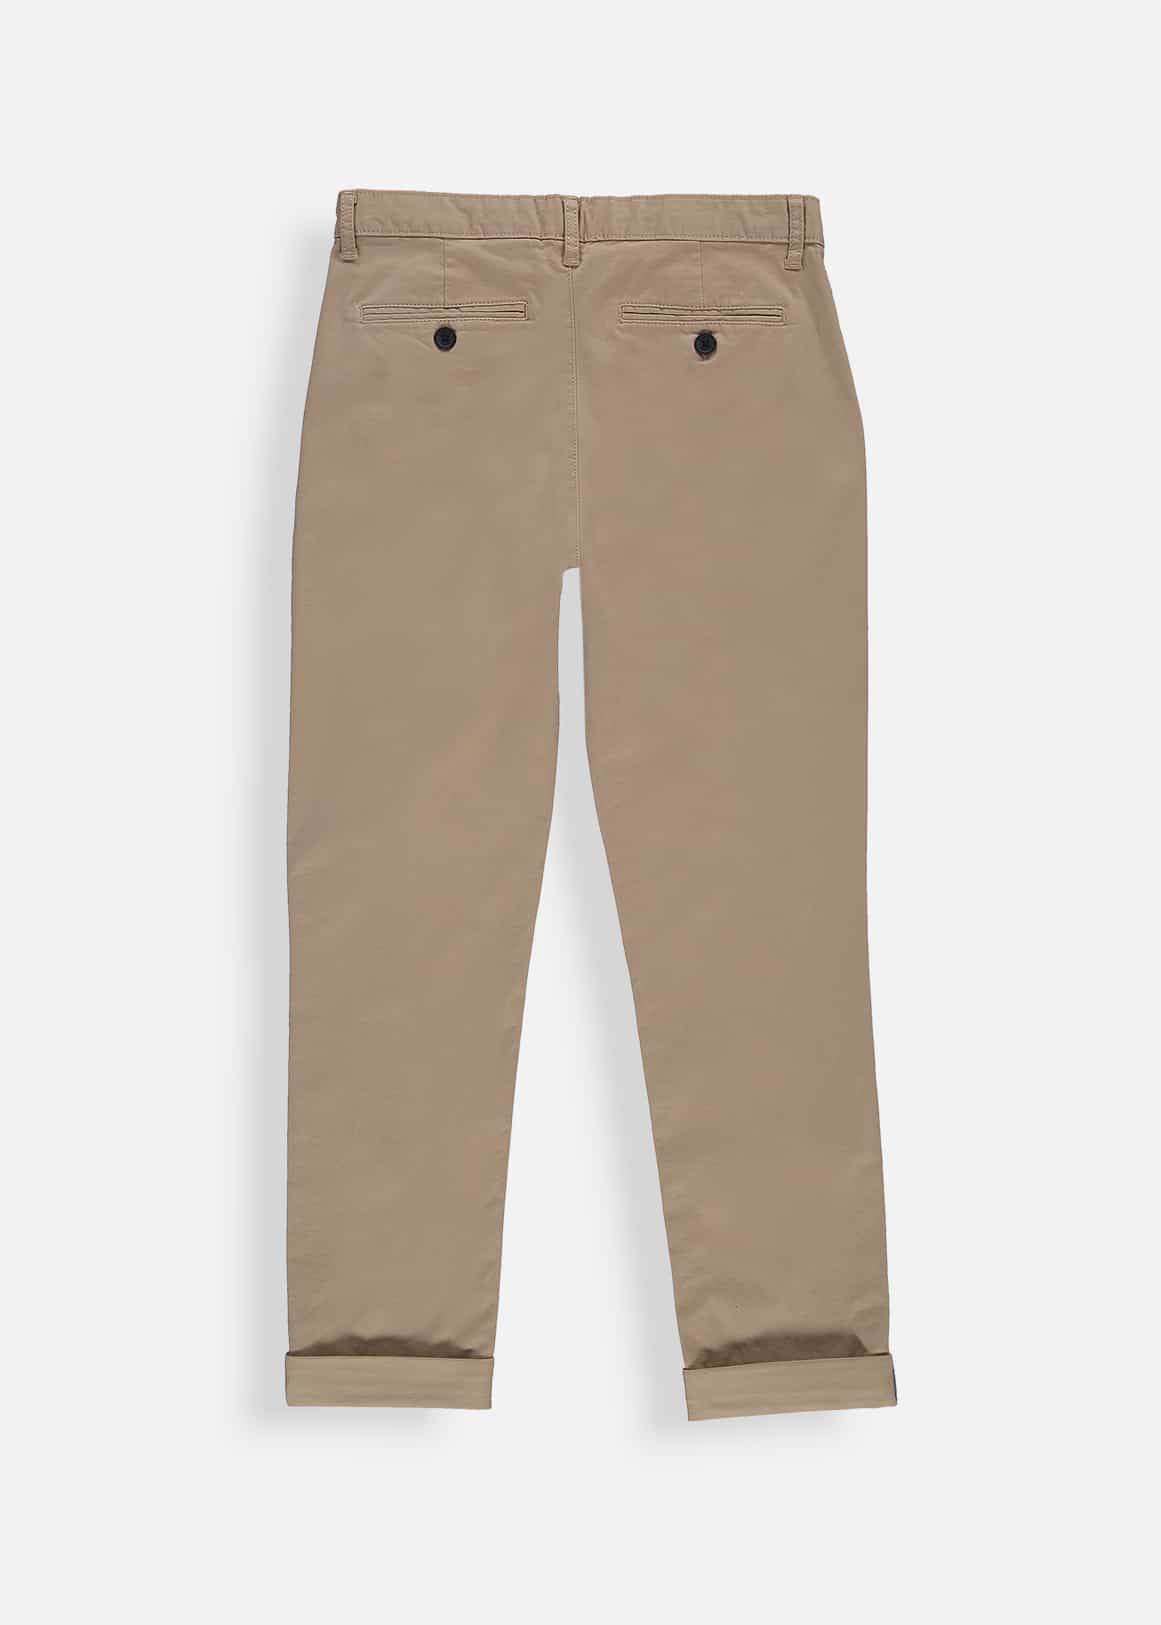 NEW STYLE CHINO PANT - Woolworths Mauritius Online